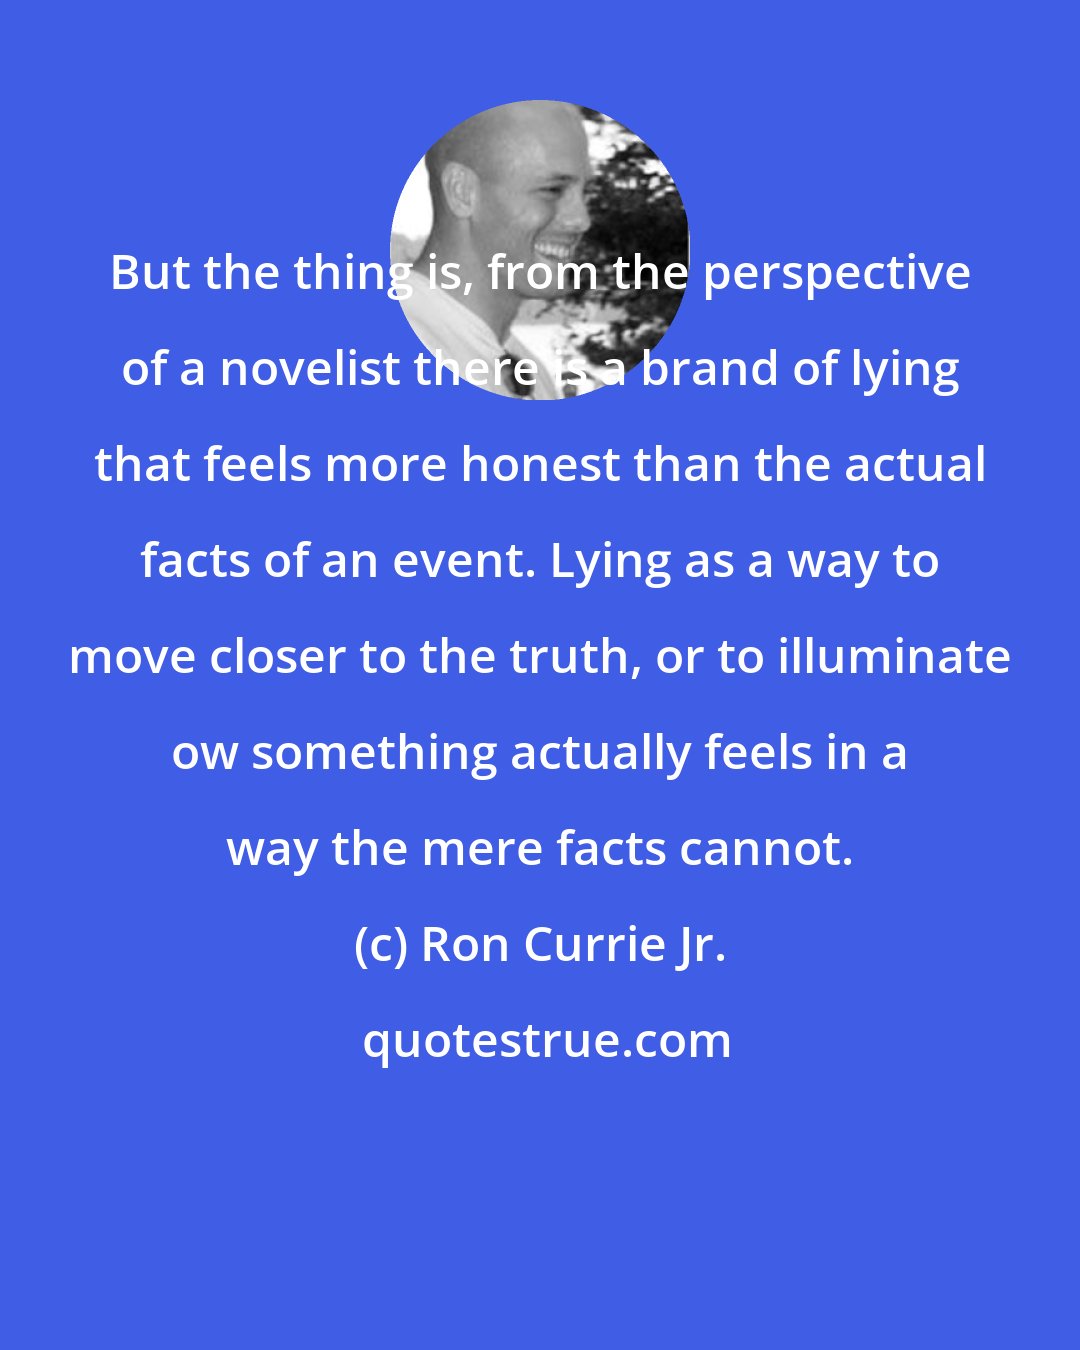 Ron Currie Jr.: But the thing is, from the perspective of a novelist there is a brand of lying that feels more honest than the actual facts of an event. Lying as a way to move closer to the truth, or to illuminate ow something actually feels in a way the mere facts cannot.